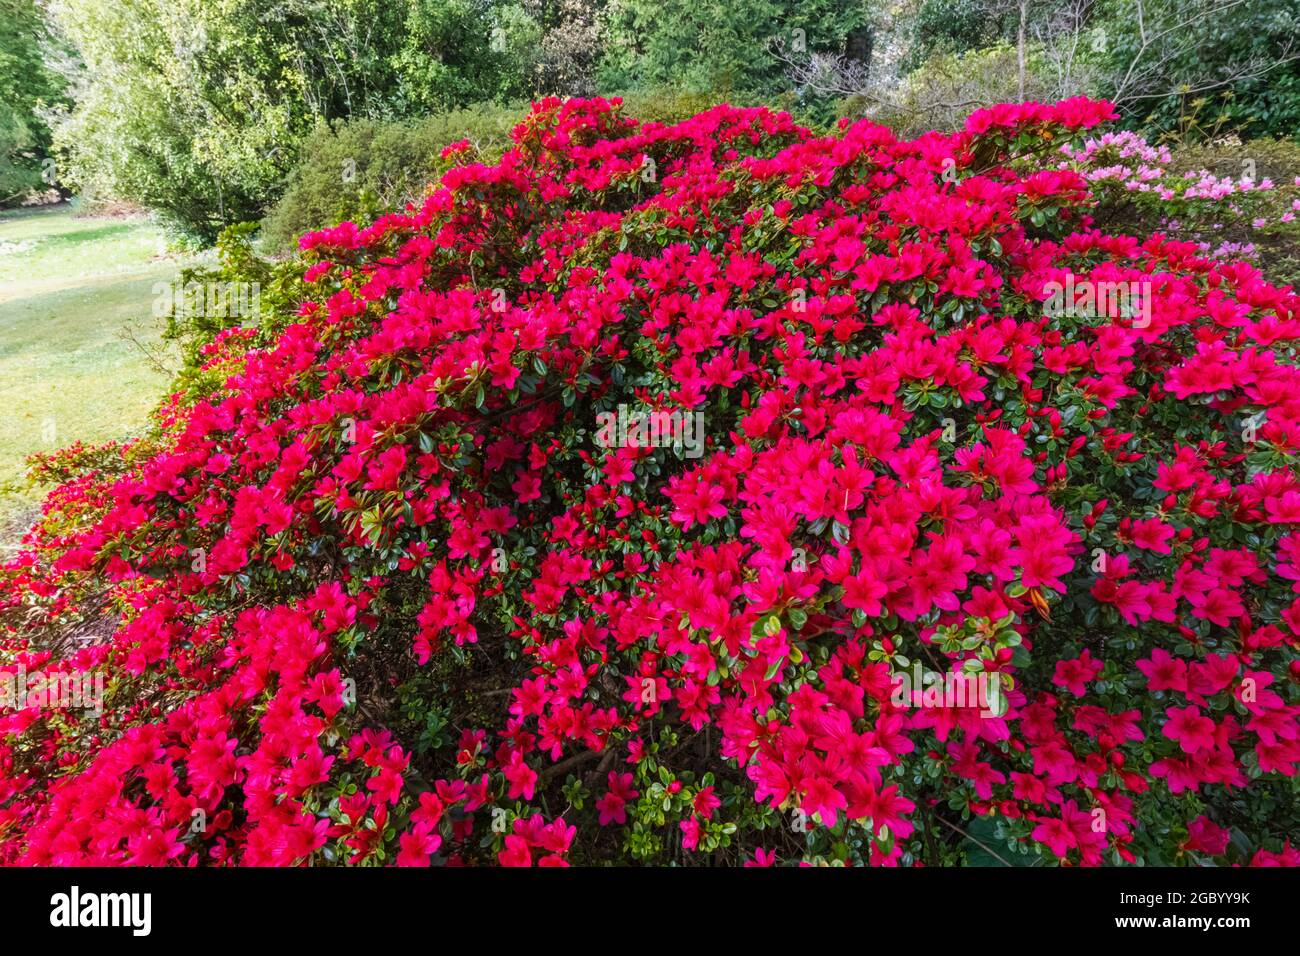 England, Hampshire, New Forest, Exbury Gardens, Rhododendron in Bloom Stock Photo